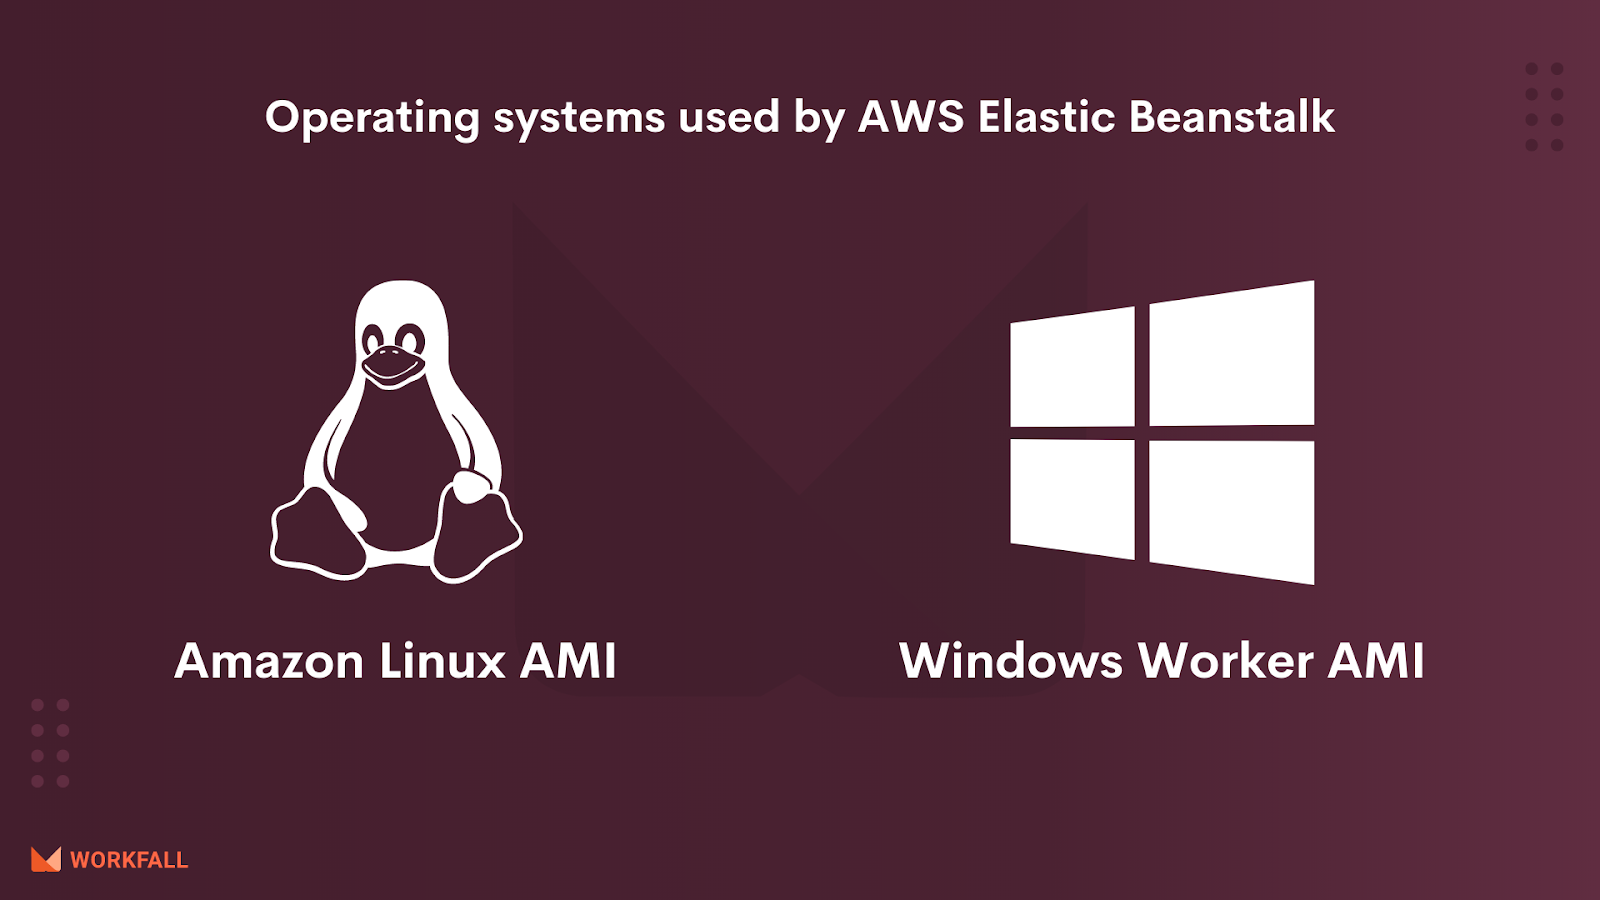 Operating systems used by AWS Elastic Beanstalk